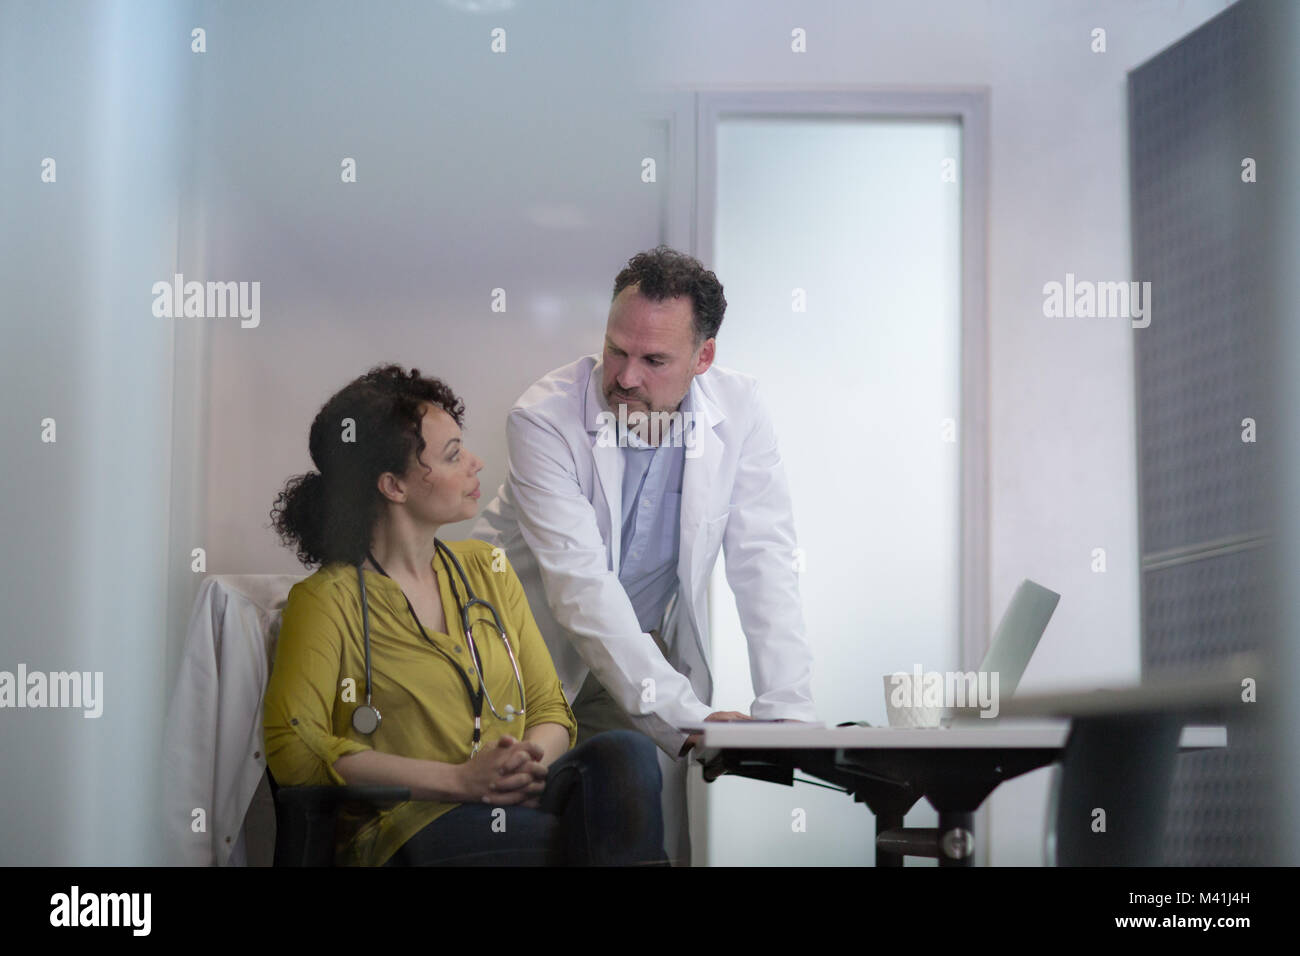 Medical Doctors discussing patient treatment together Stock Photo